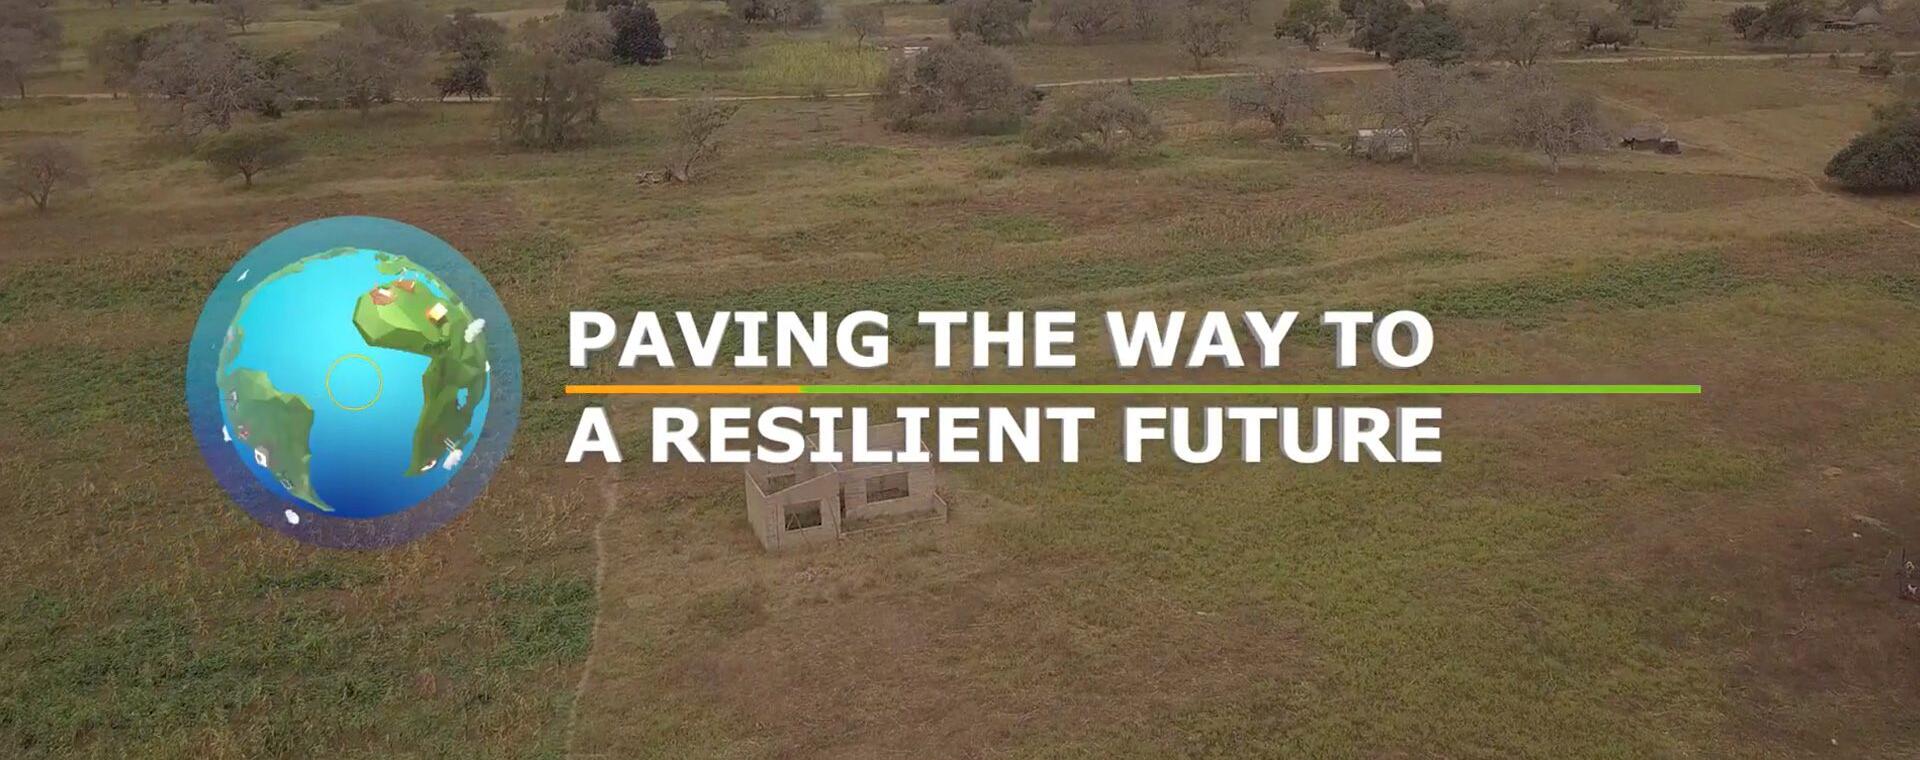 Mozambique- Paving the way to a Resilient Future